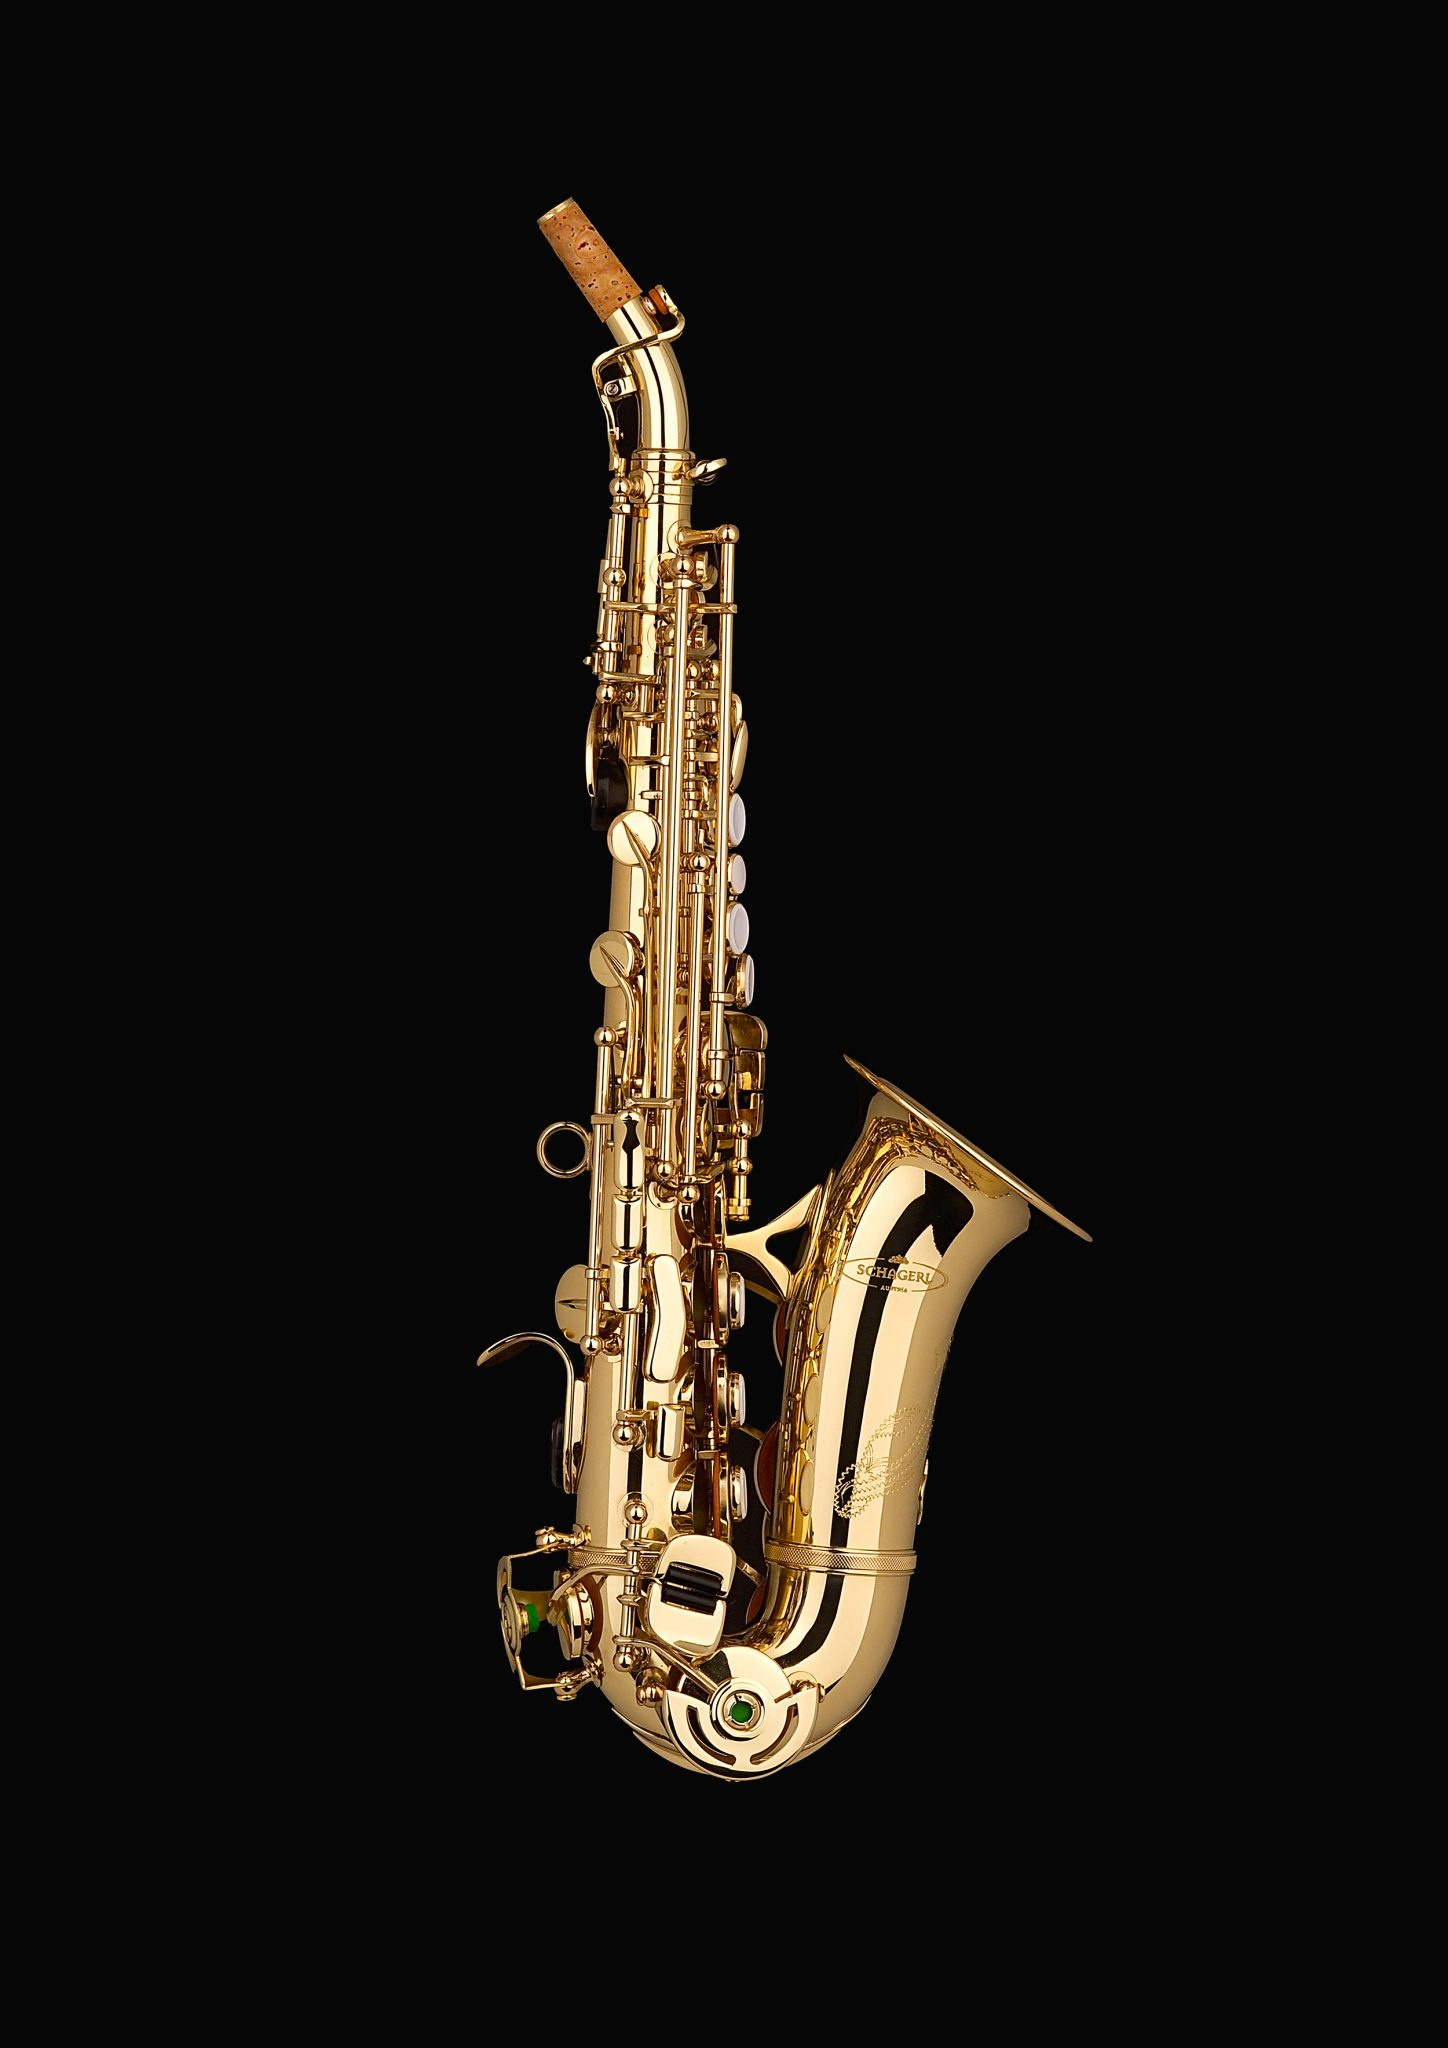 Saxophone: SC-600, Schagerl Woodwind, A keyed wind instrument of mellow tone color. 1450x2050 HD Wallpaper.